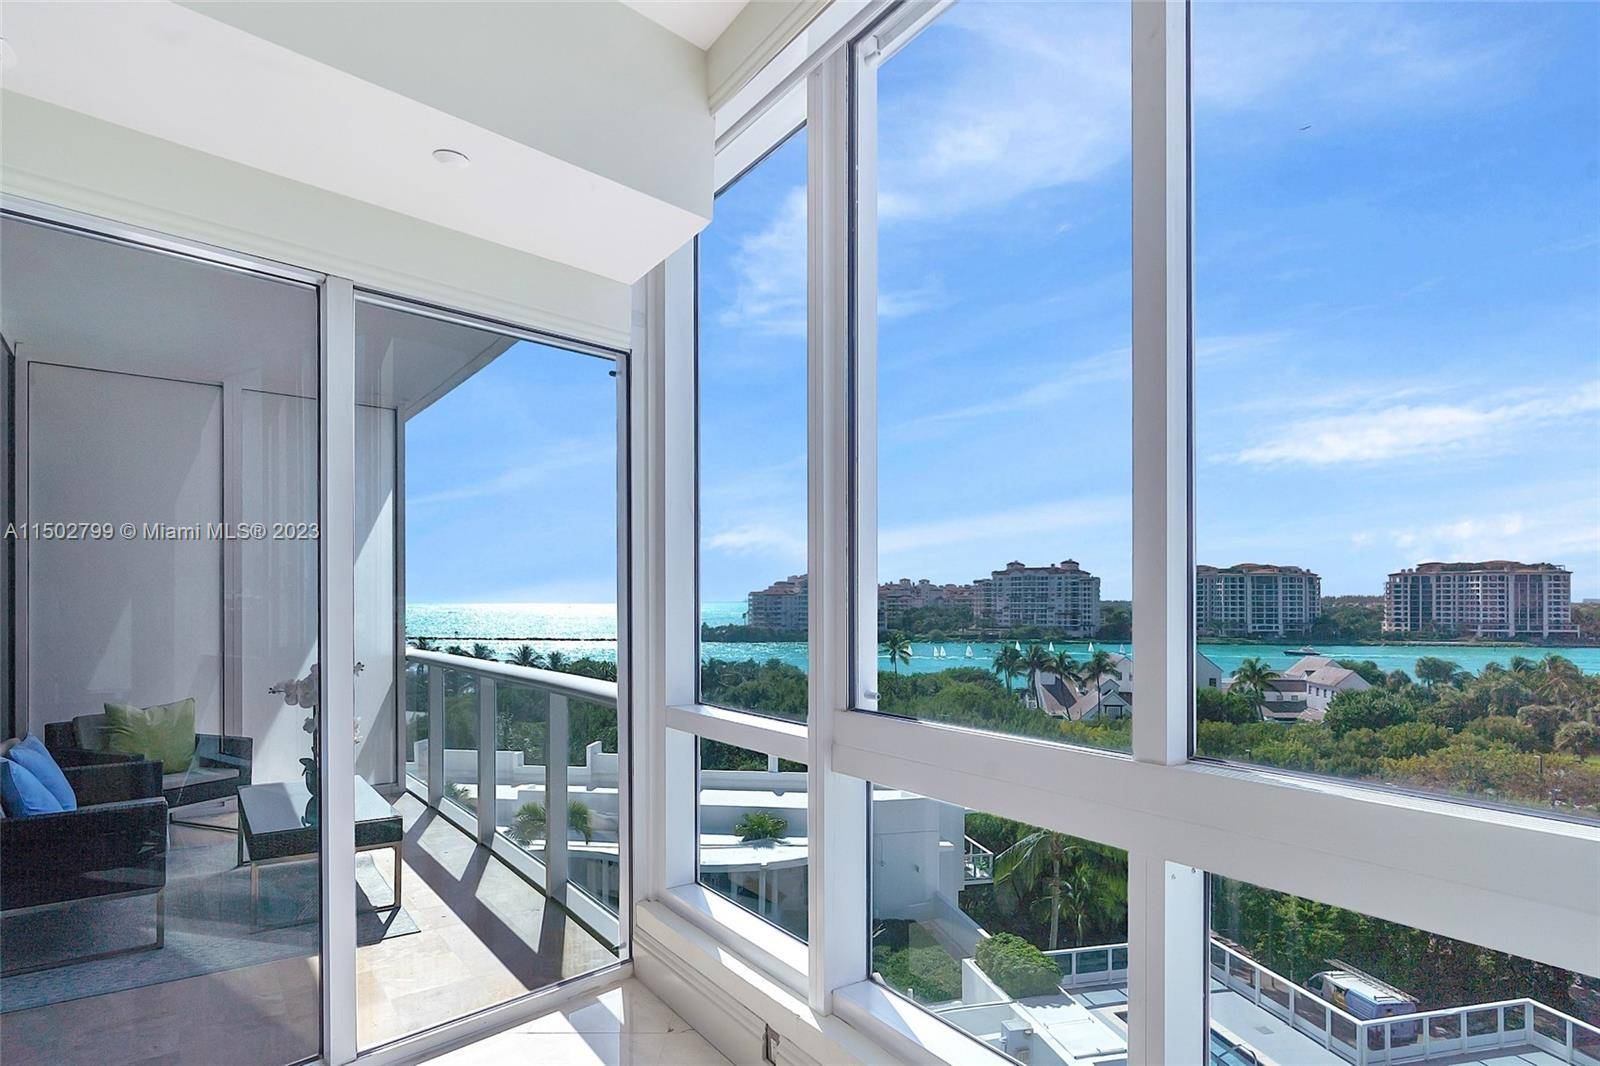 Rarely available large 1 br 1 1 2 bath with private balcony accessible from the bright living room and vast master bedroom overlooking lush tree top greenery and layered ocean ...